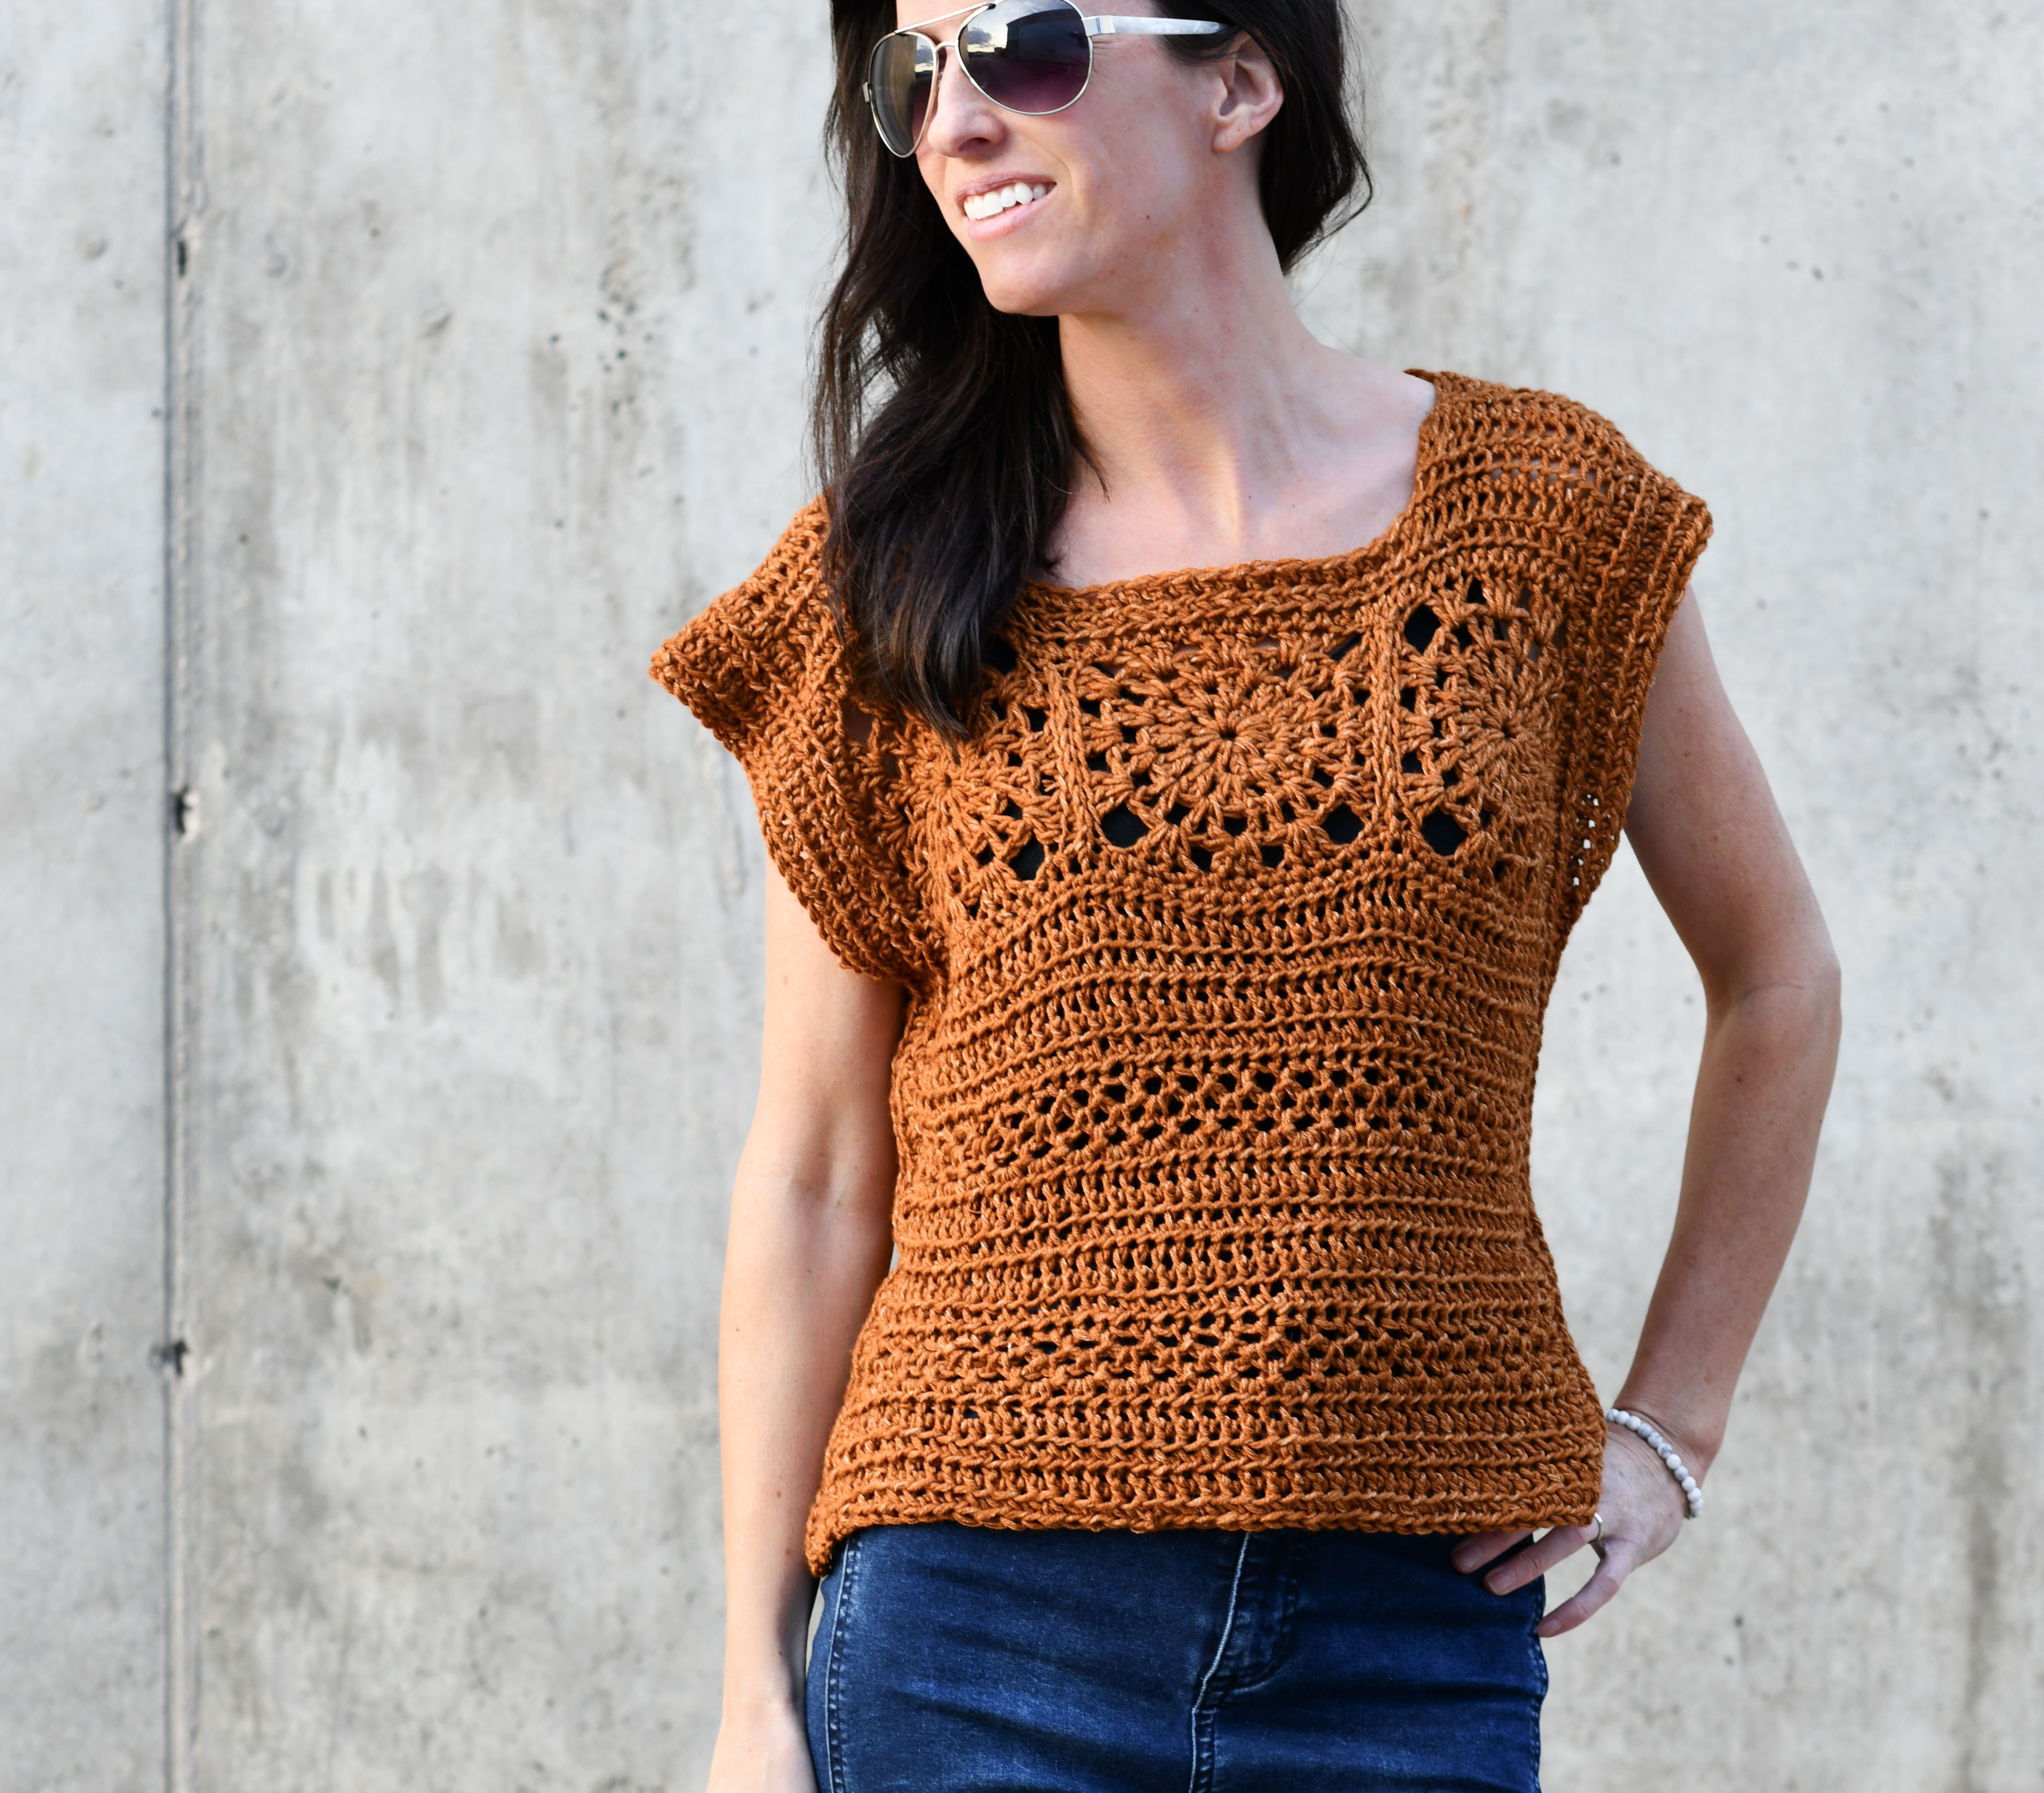 How To Crochet A Summer Boho Top Free Pattern Mama In A Stitch,Moscow Mule Ingredients Whiskey